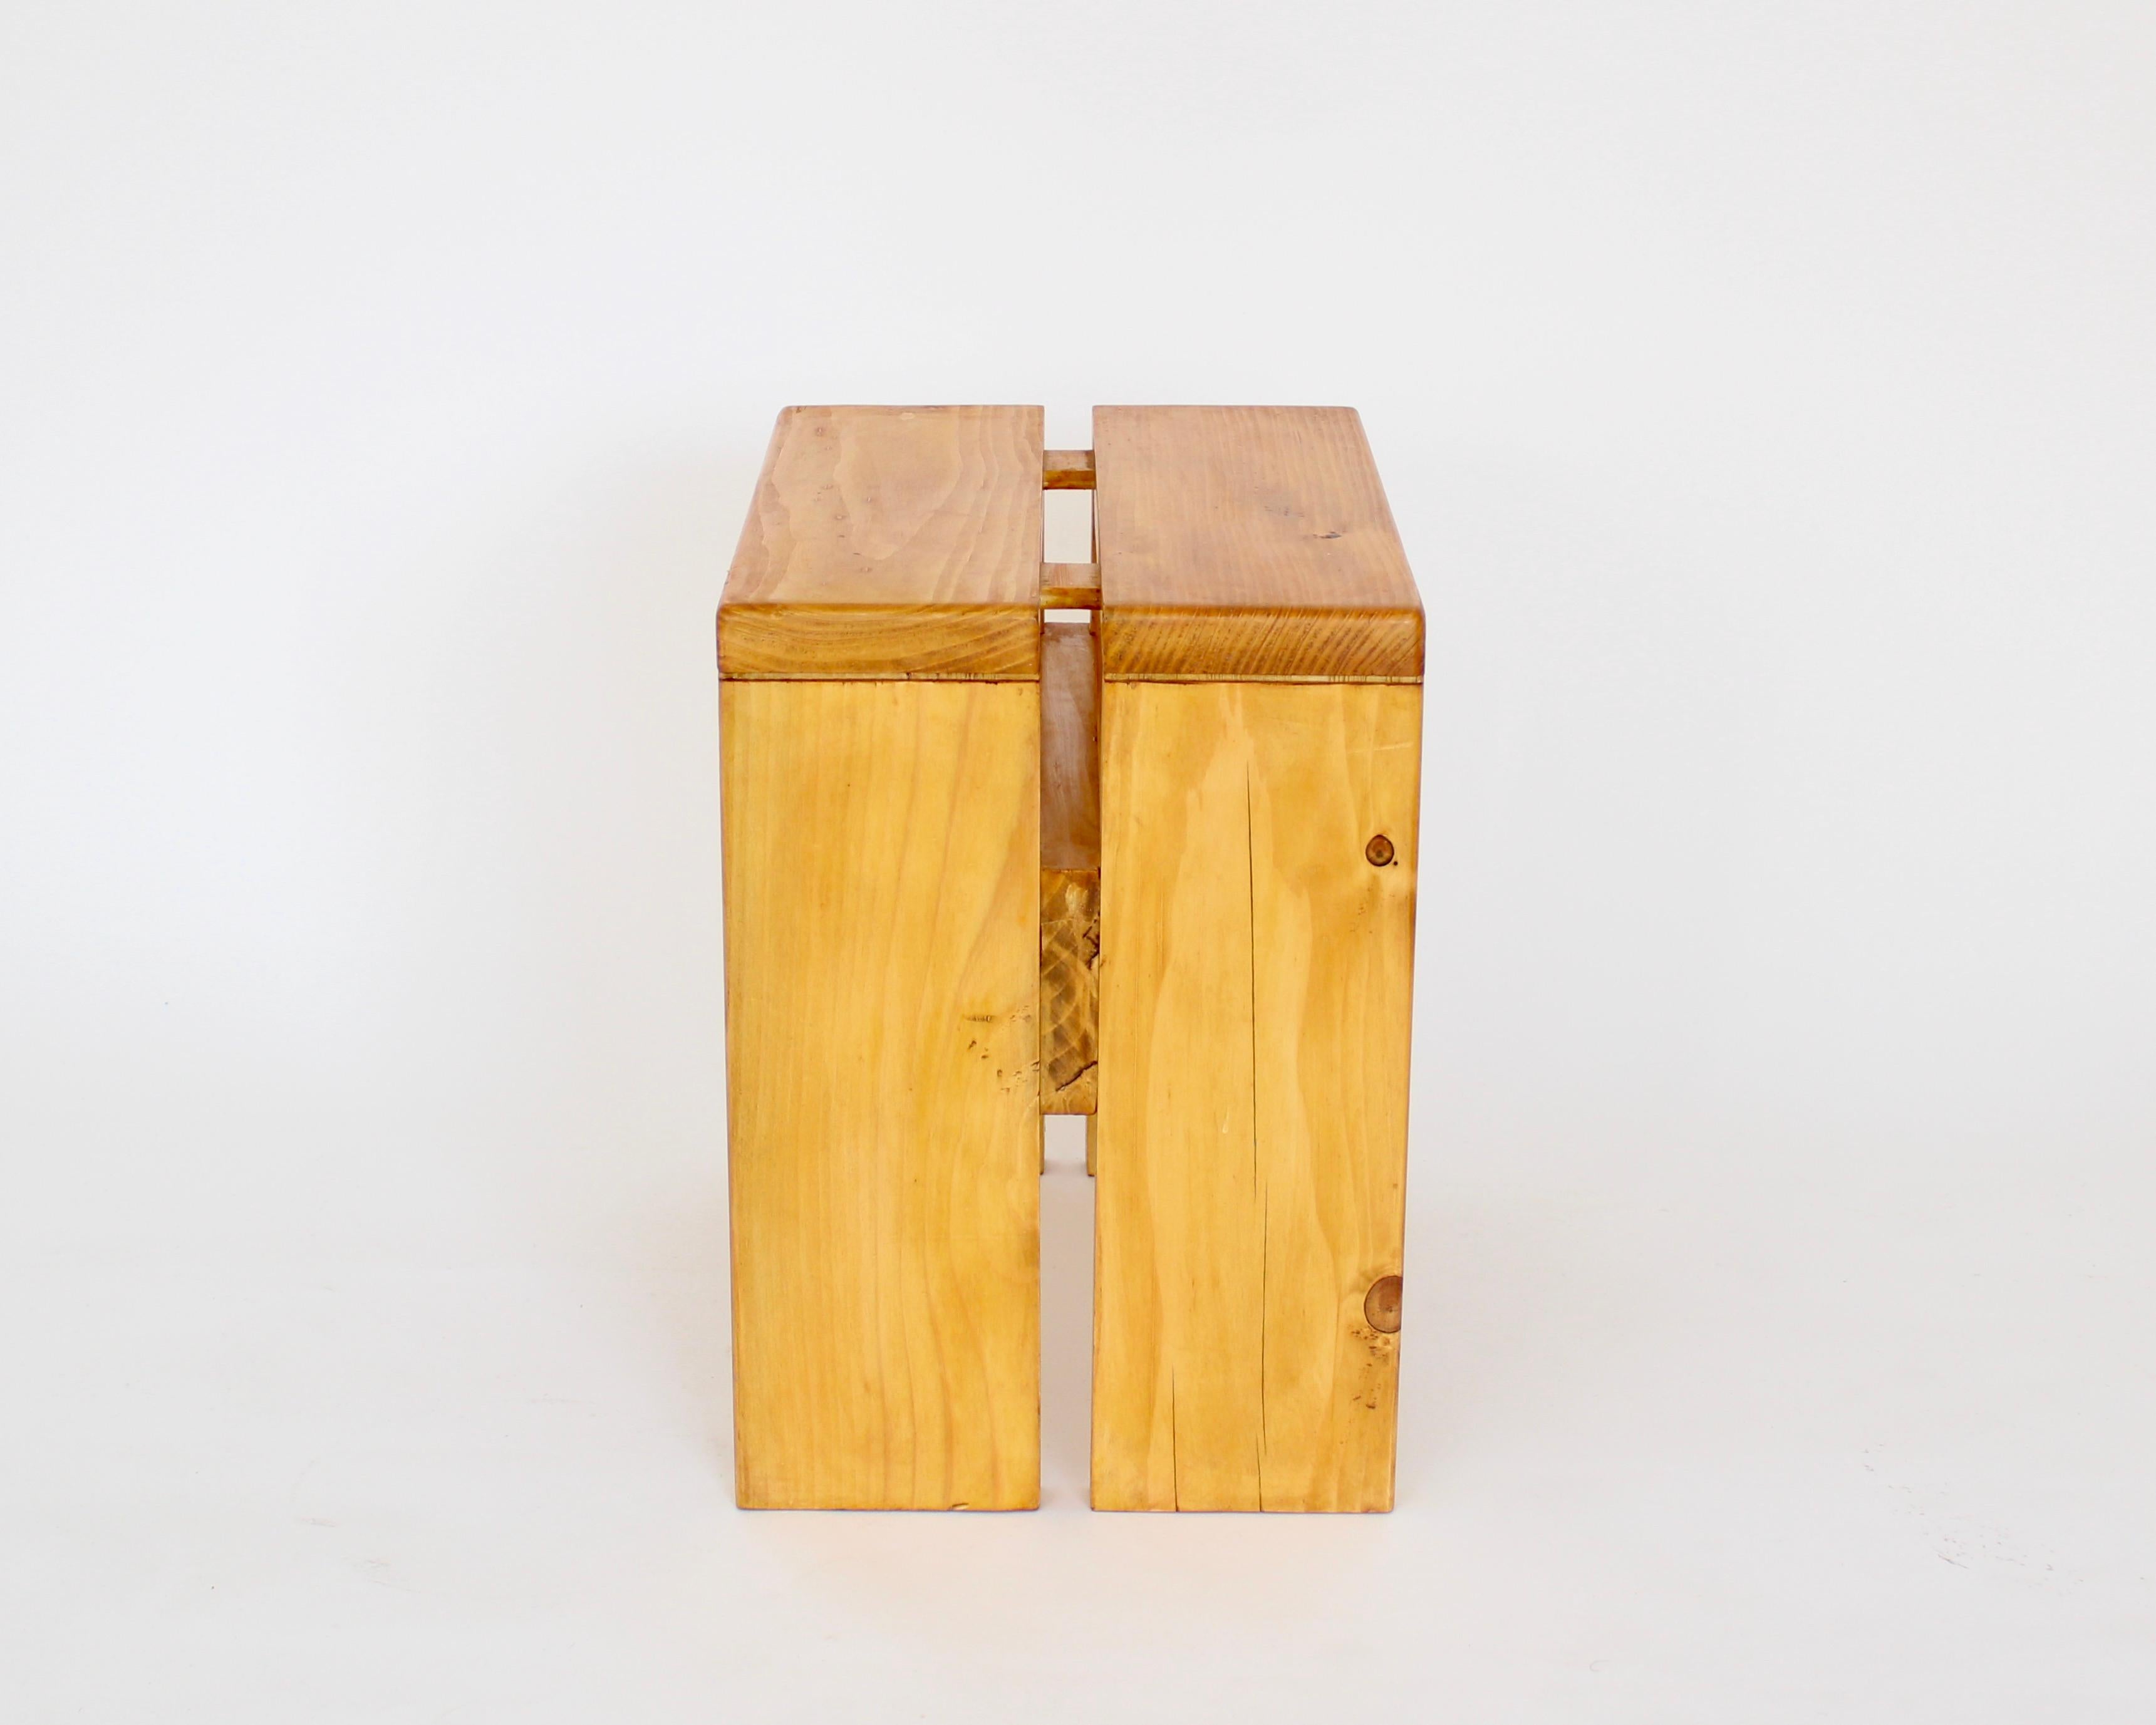 Charlotte Perriand pair of stools for Les Arcs ski resort, circa 1960.
Manufactured in France. 
These are the iconic Charlotte Perriand simple and straightforward pine stools used commonly throughout the ski resort. 
Excellent condition.